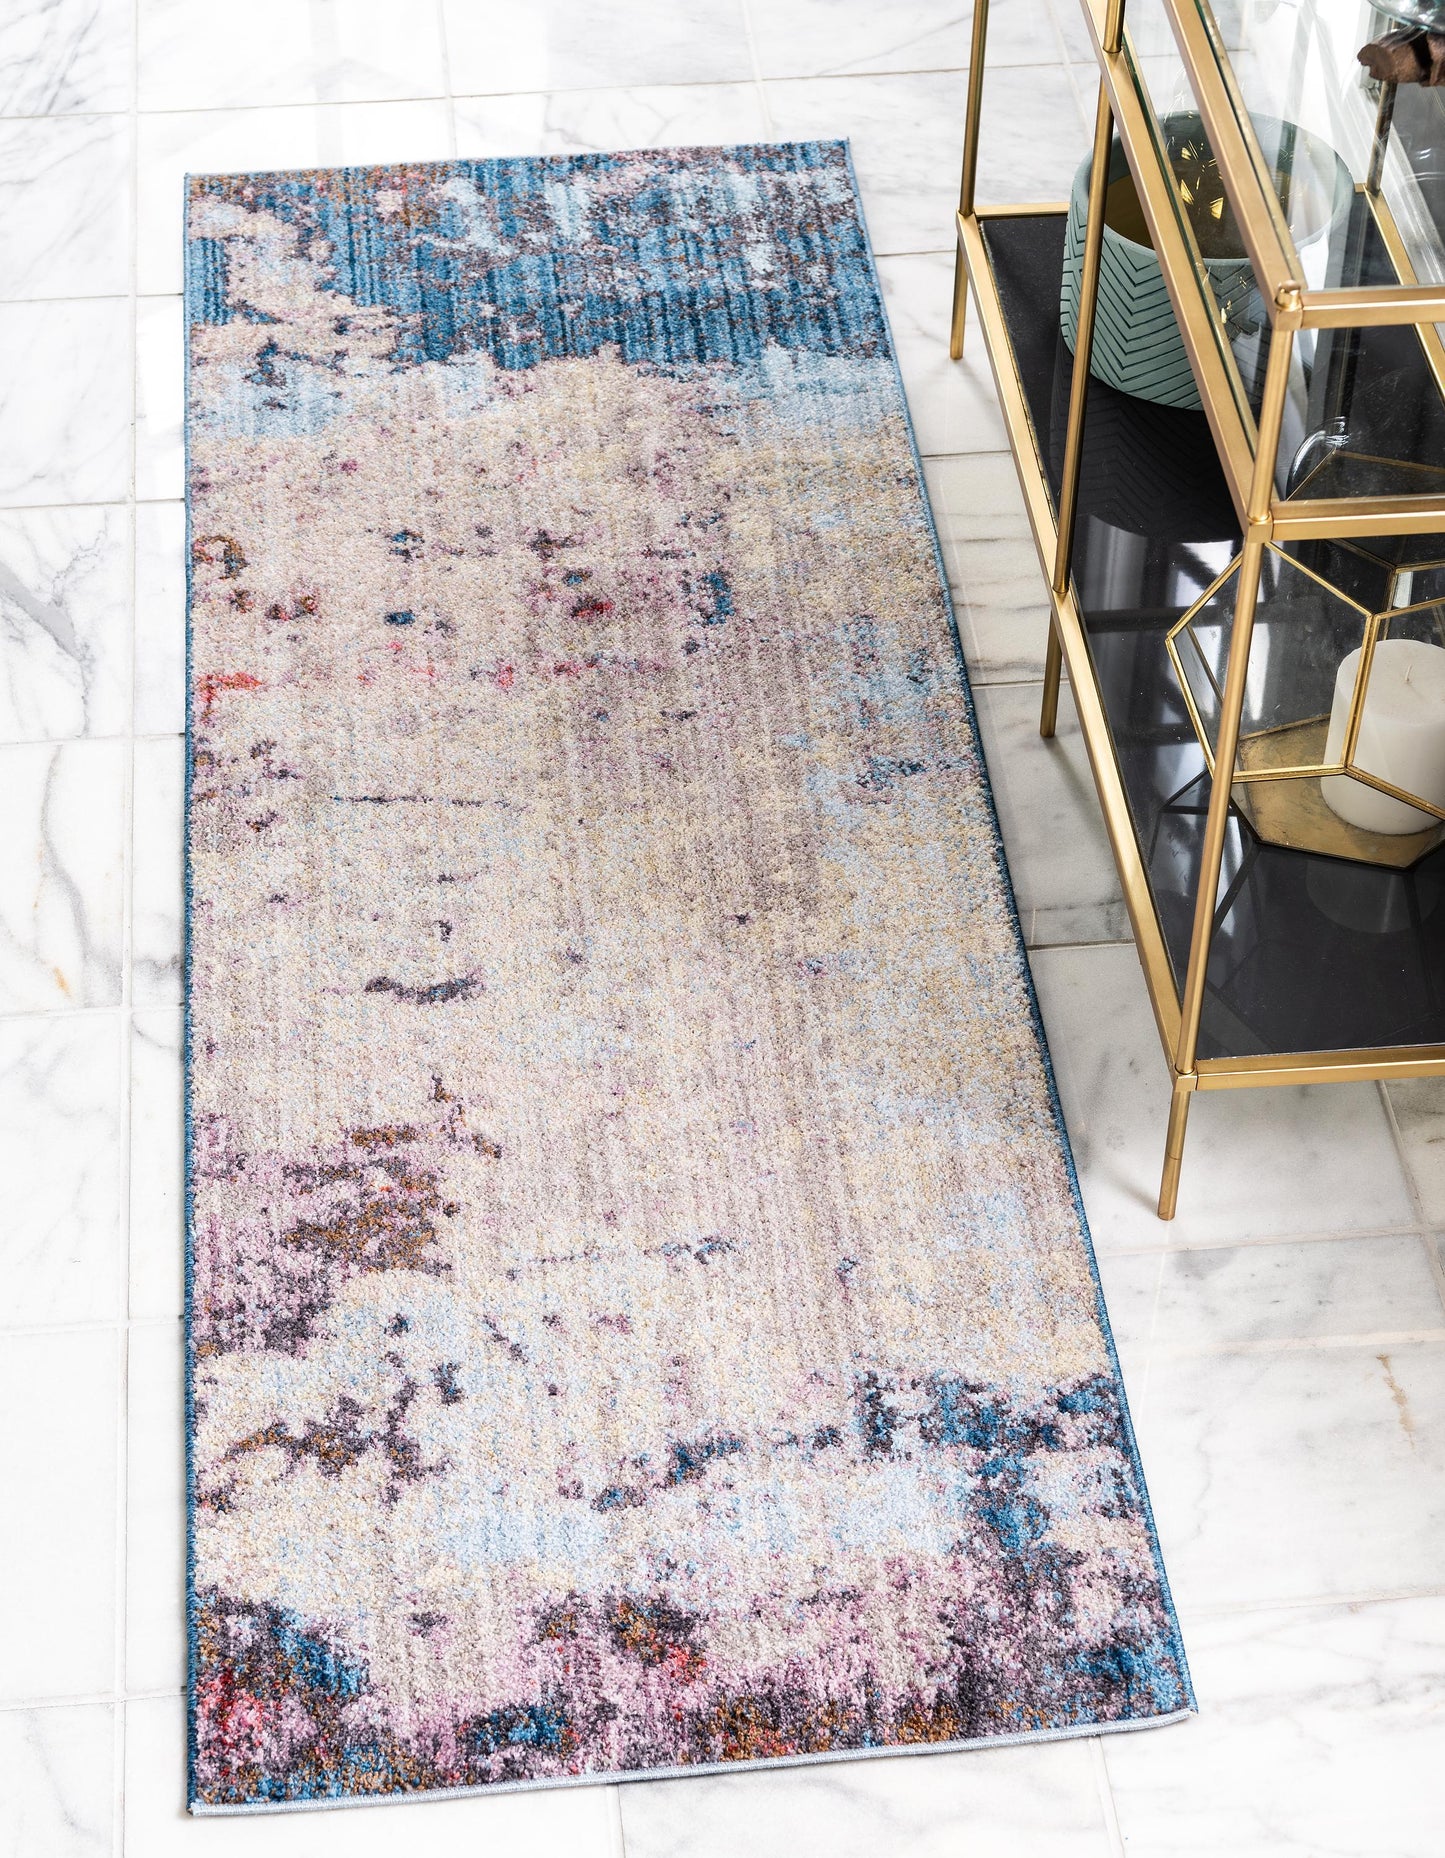 Deon - Blue Gray Area Rug - Nordic Side - abstract-rug, Area-rug, feed-cl0-over-80-dollars, hallway-runner, large-rug, modern, modern-rug, round-rug, unique-loom, us-only, us-ship